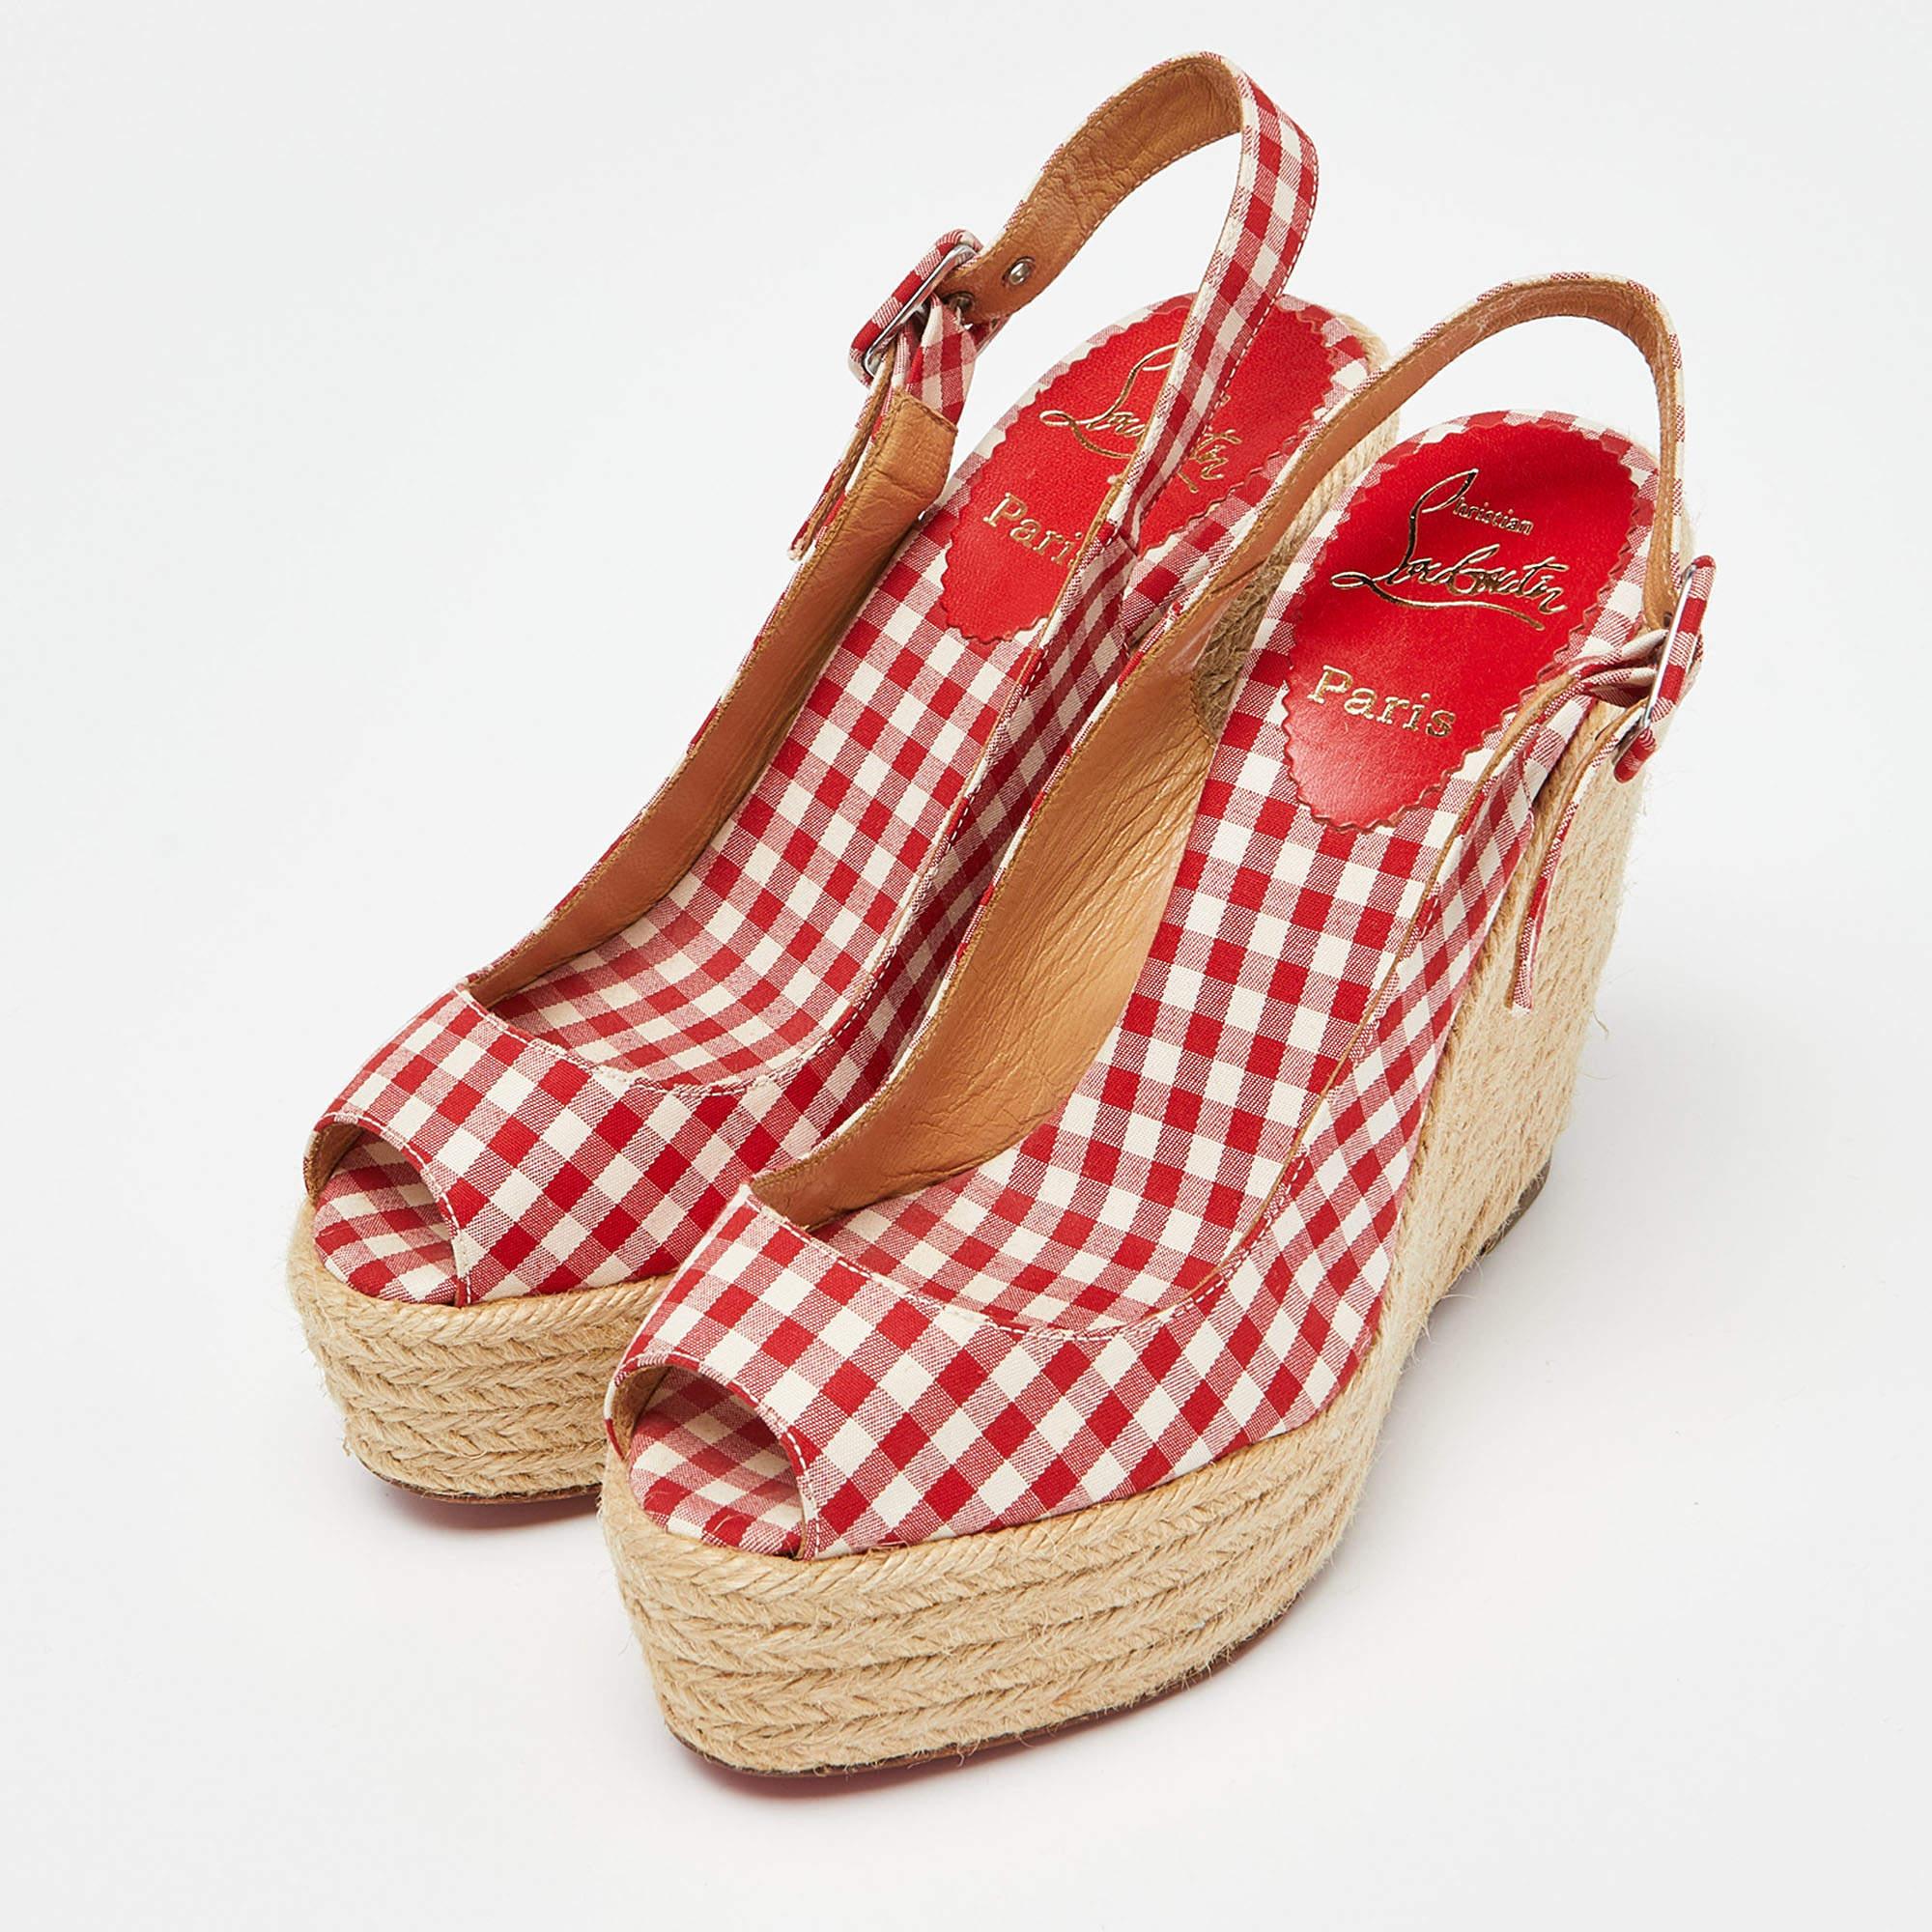 Christian Louboutin Red/White Gingham Fabric Menorca Espadrille Wedge Size 37 For Sale 4